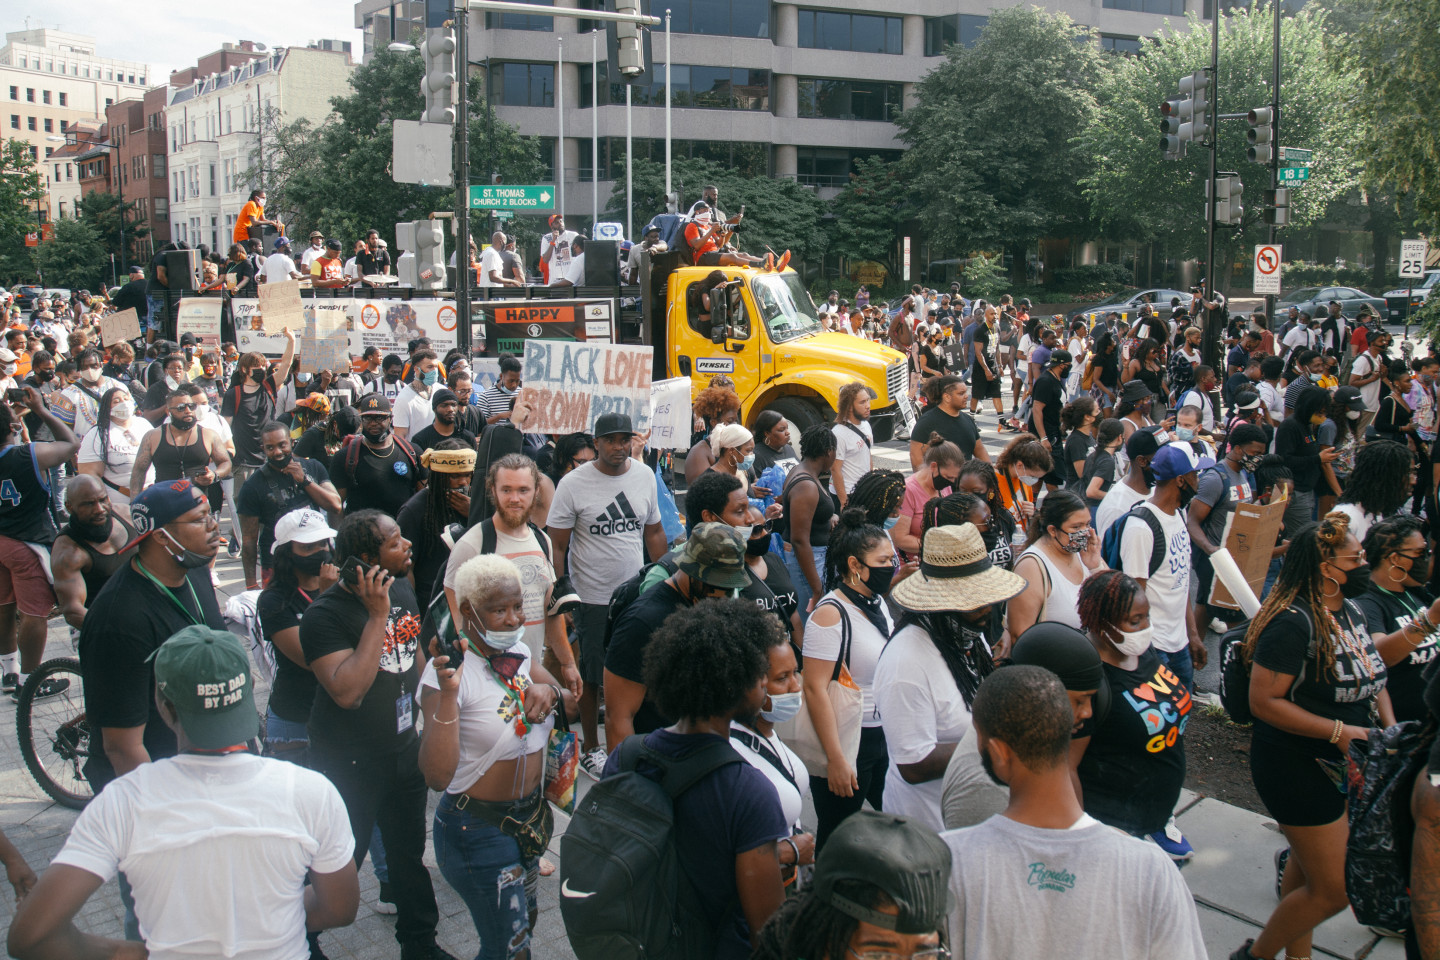 Some of D.C.’s most iconic go-go bands paraded the city for Juneteenth